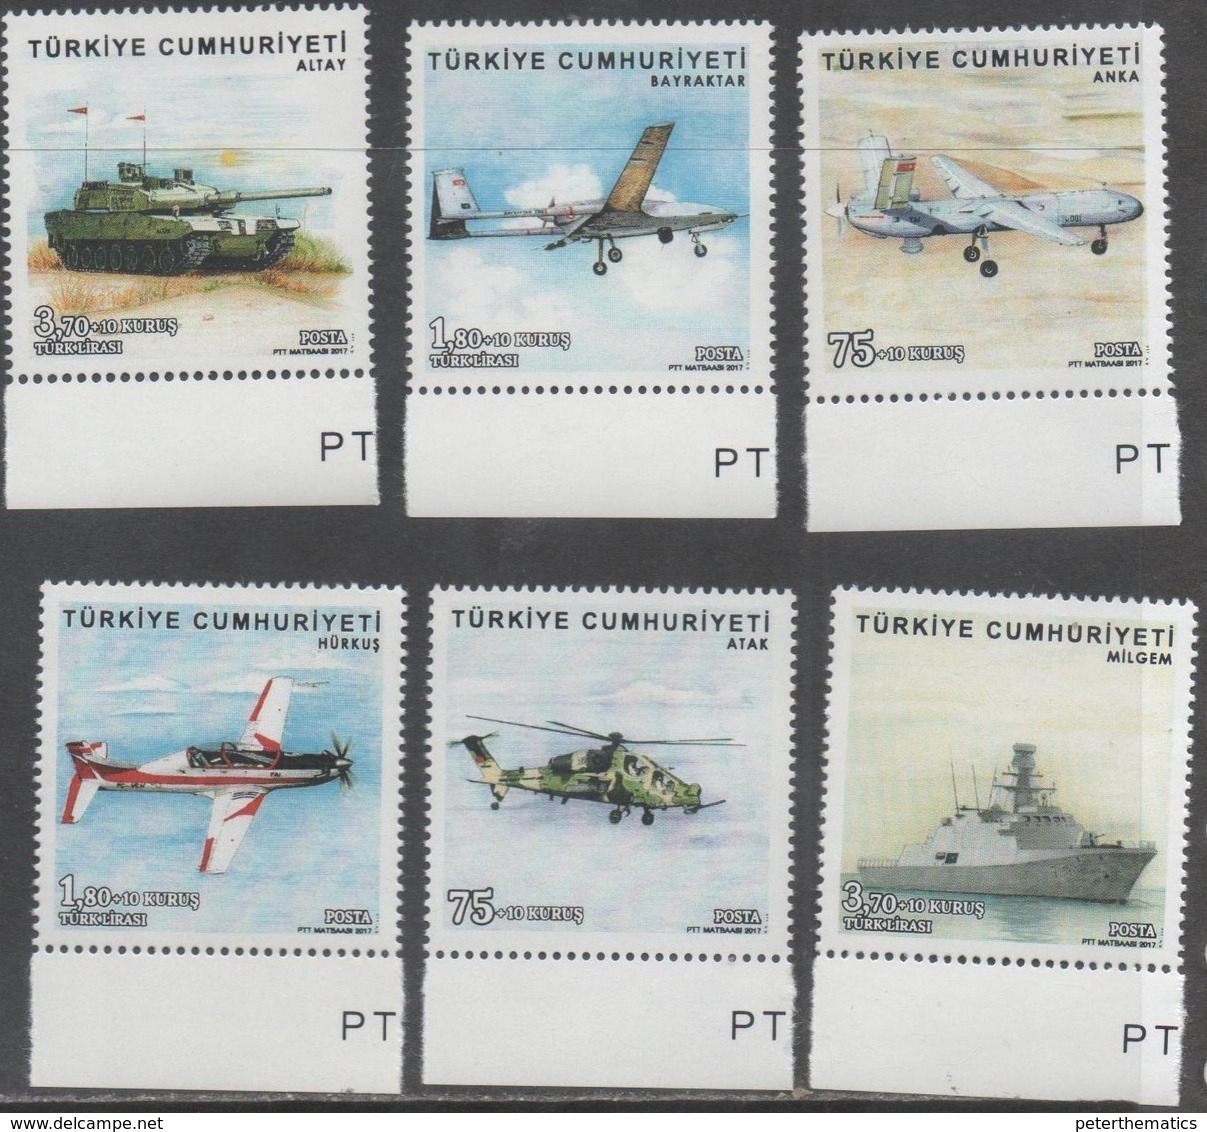 TURKEY, 2017, MNH, ARMED FORCES, SHIPS, HELICOPTERS, TANKS, PLANES, DRONES, 6v - Militaria